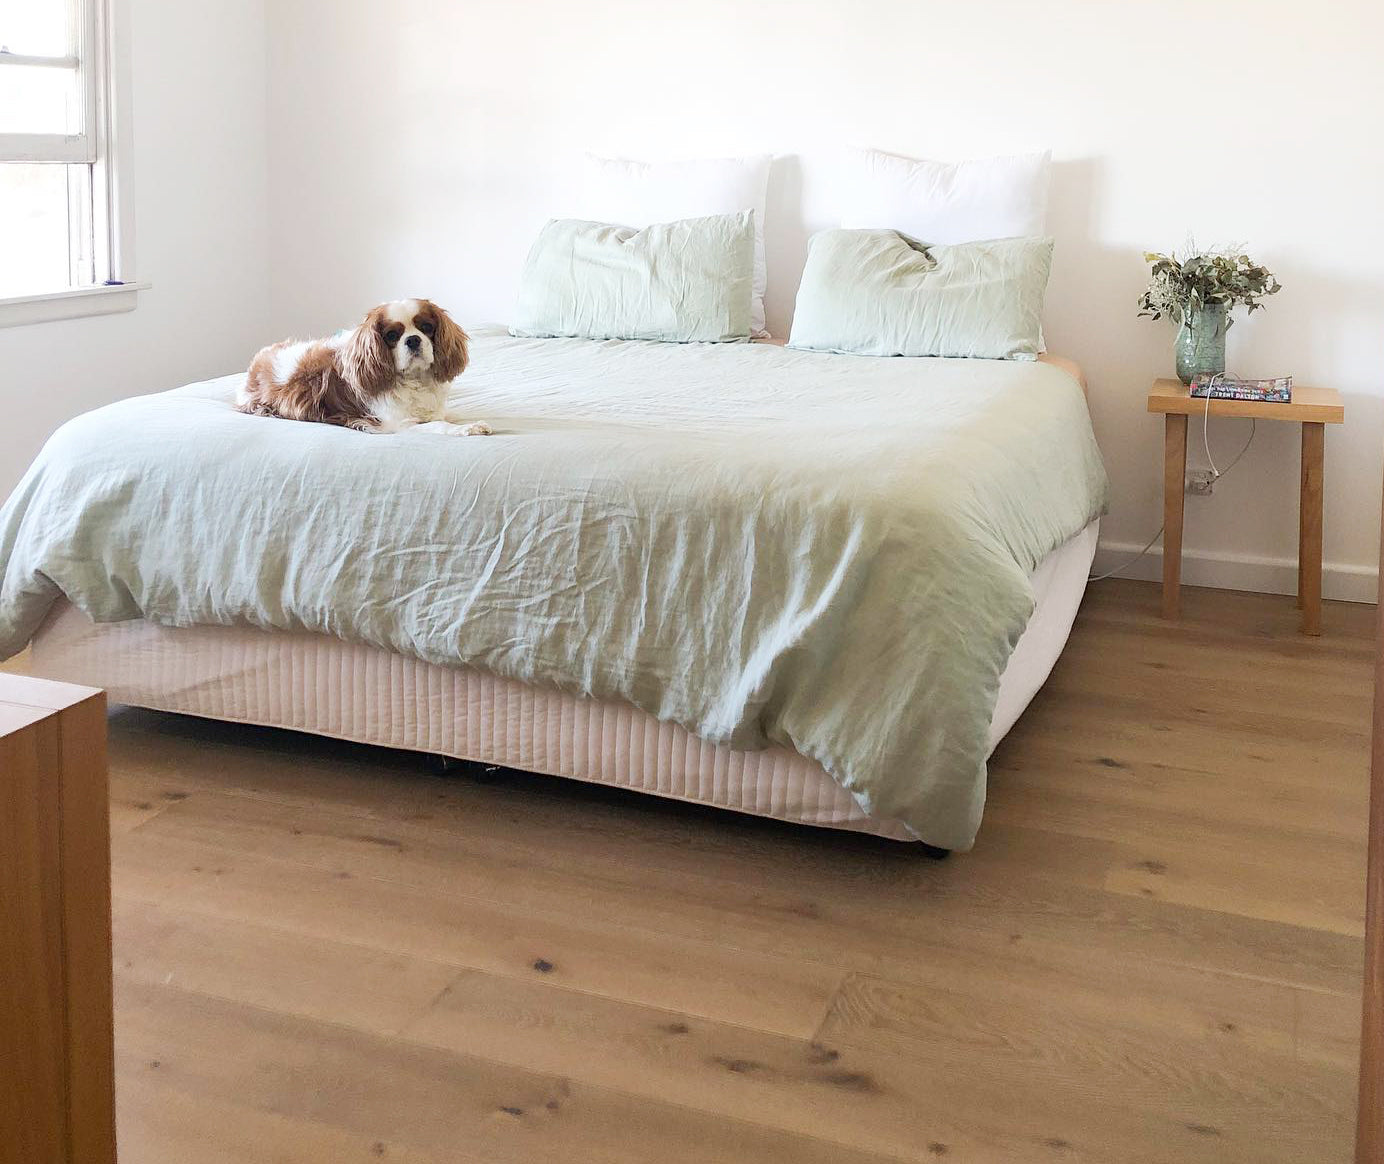 Keep Your Floors Looking Good With Pets